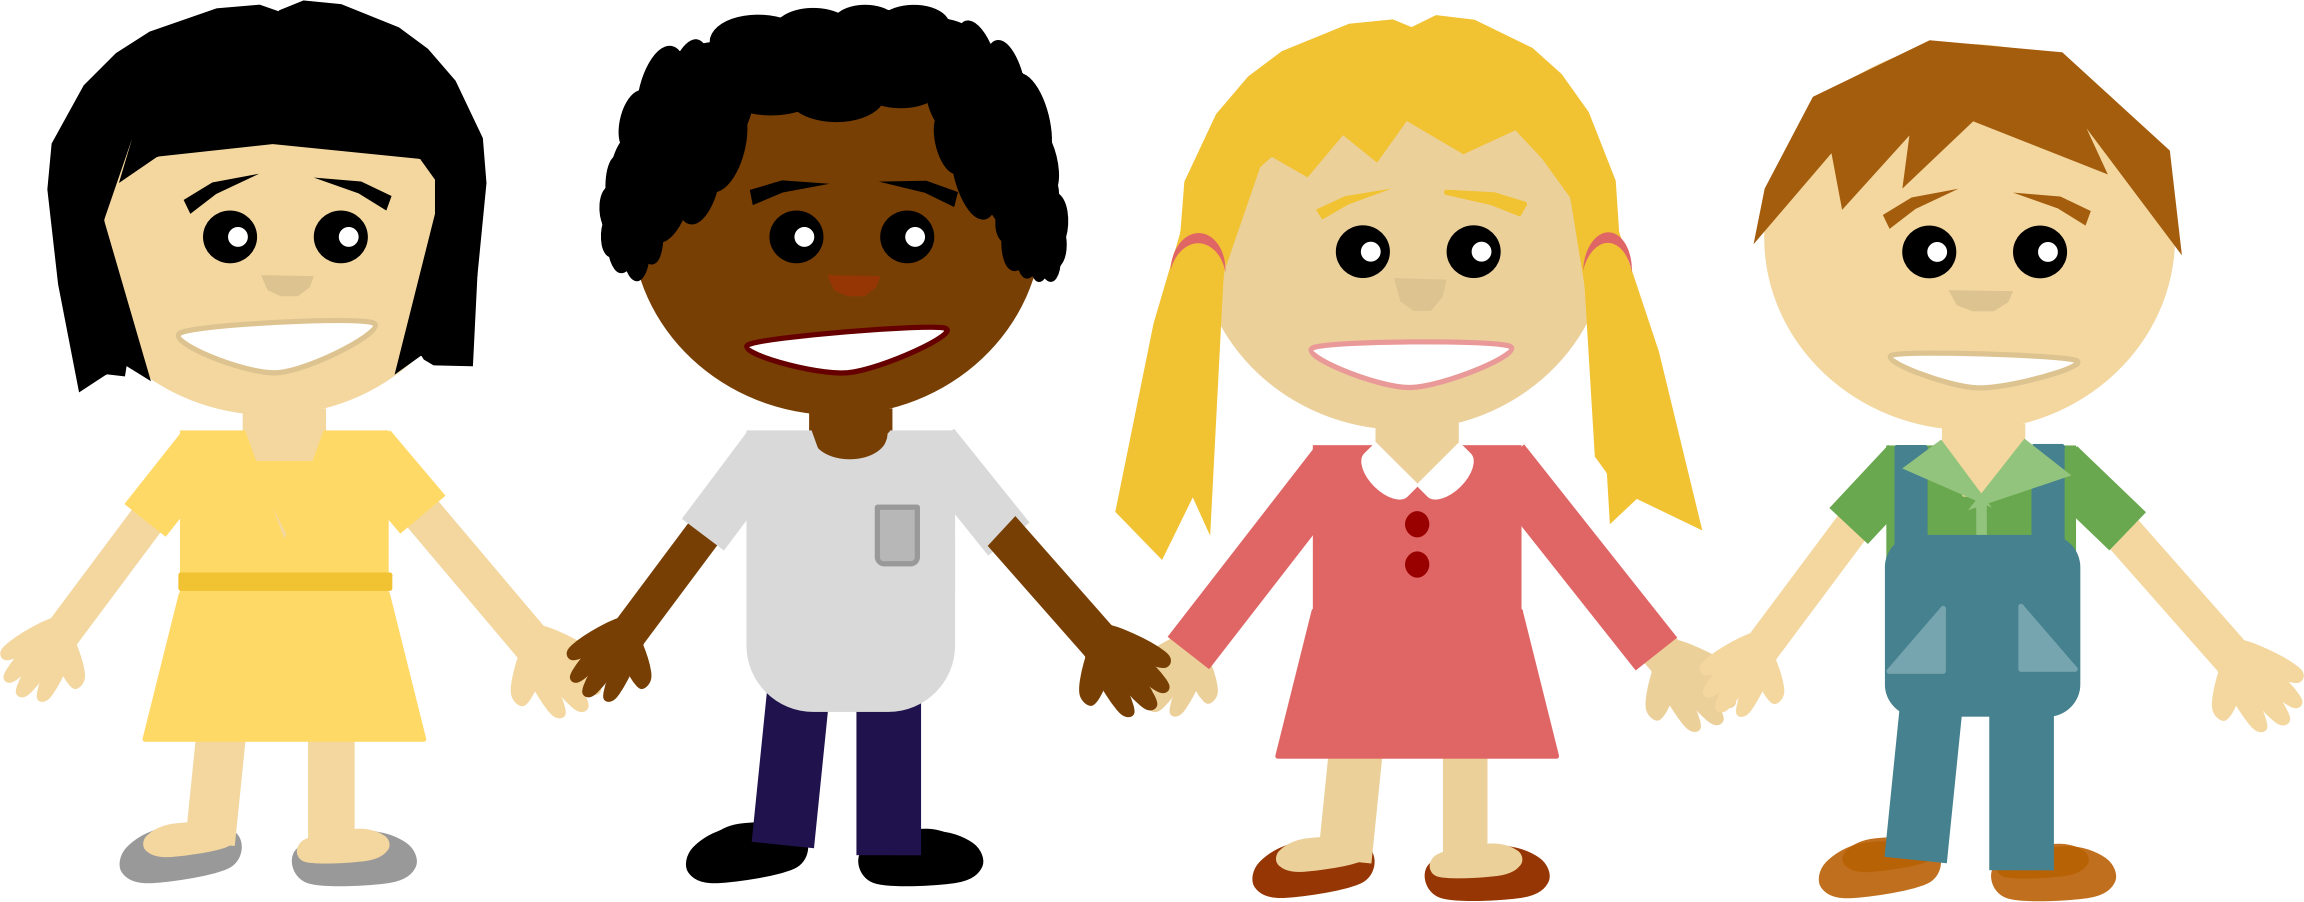 Cute People Clipart